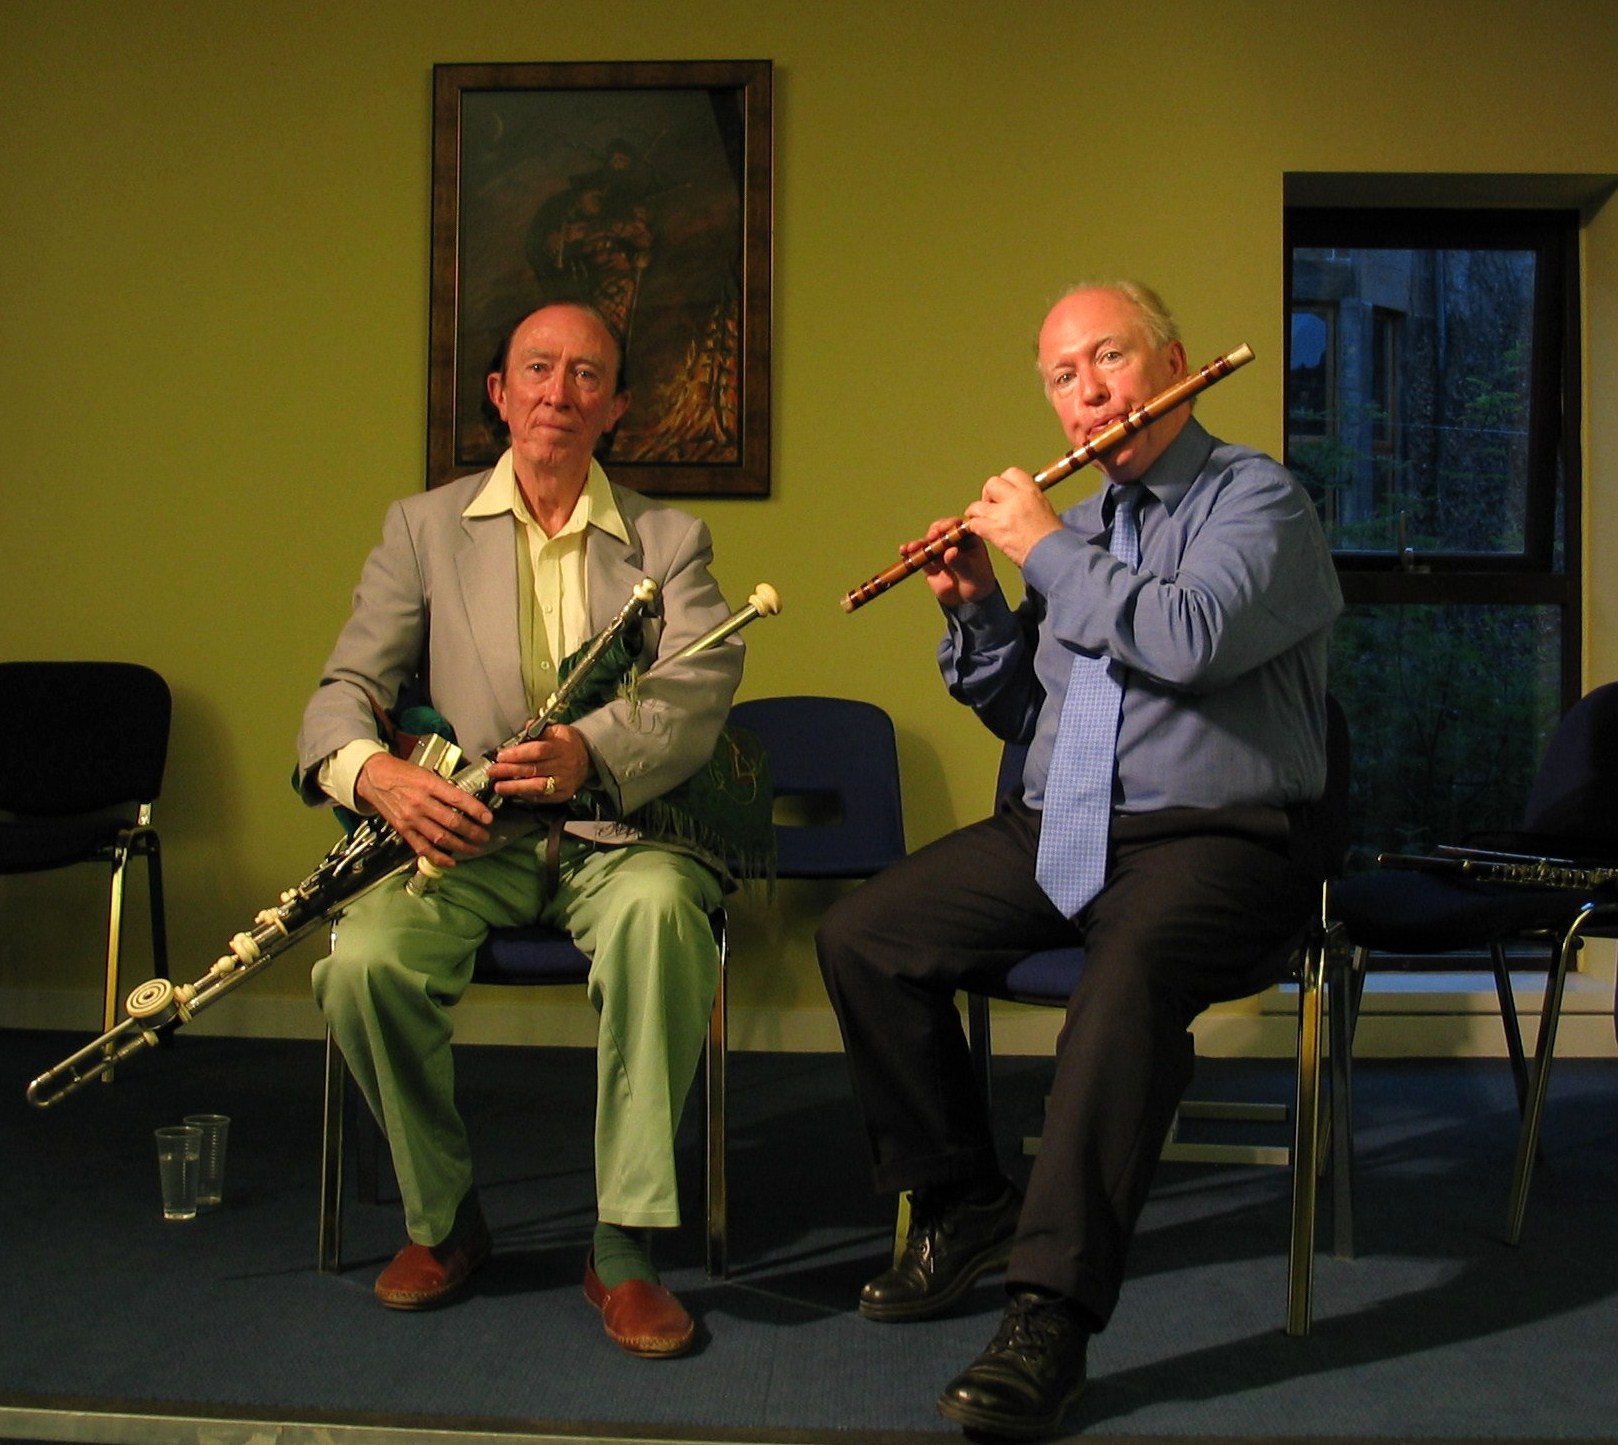 On June 20 2010 Uilleann piper Pat McNulty was interviewed by Eddie at Glasgow's College of Piping